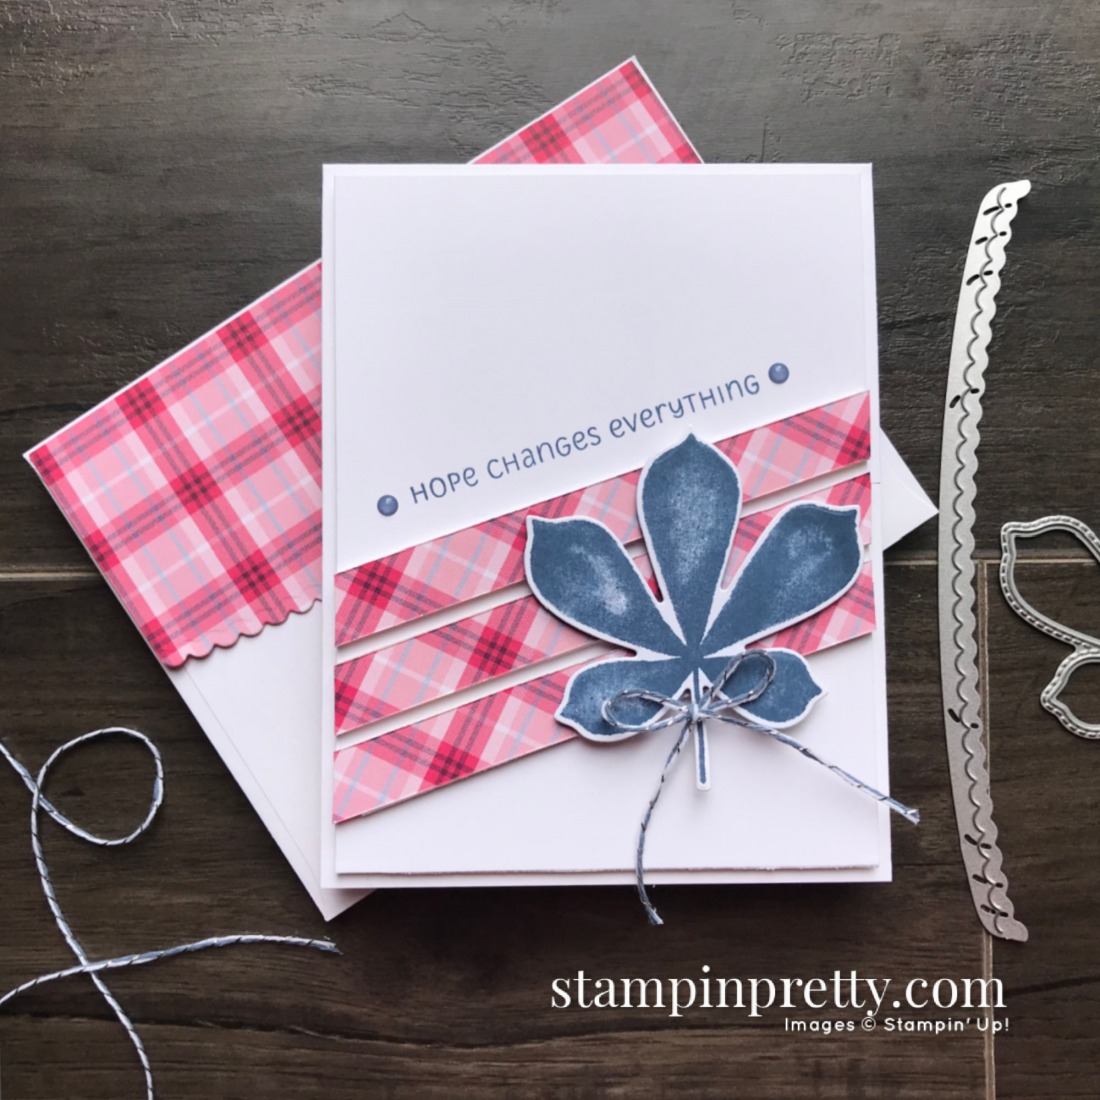 Love of Leaves Bundle from Stampin' Up! Card created by Mary Fish, Stampin' Pretty